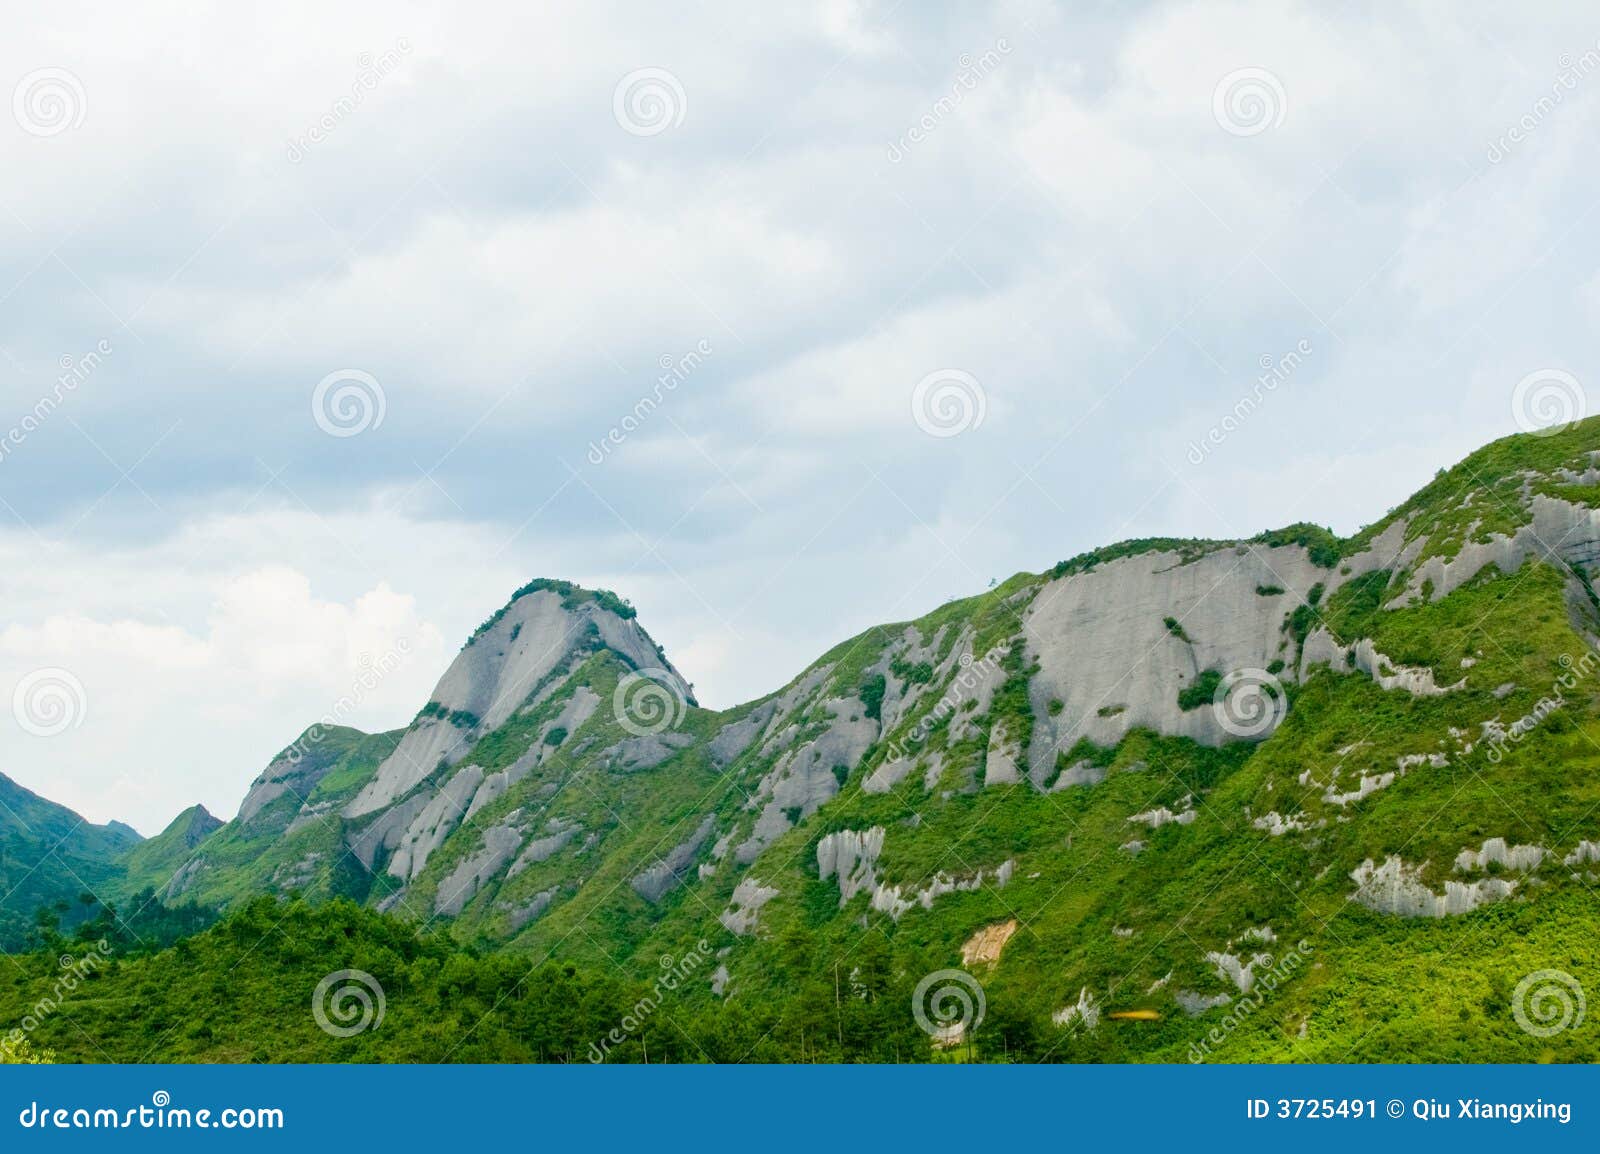 forested mountain range